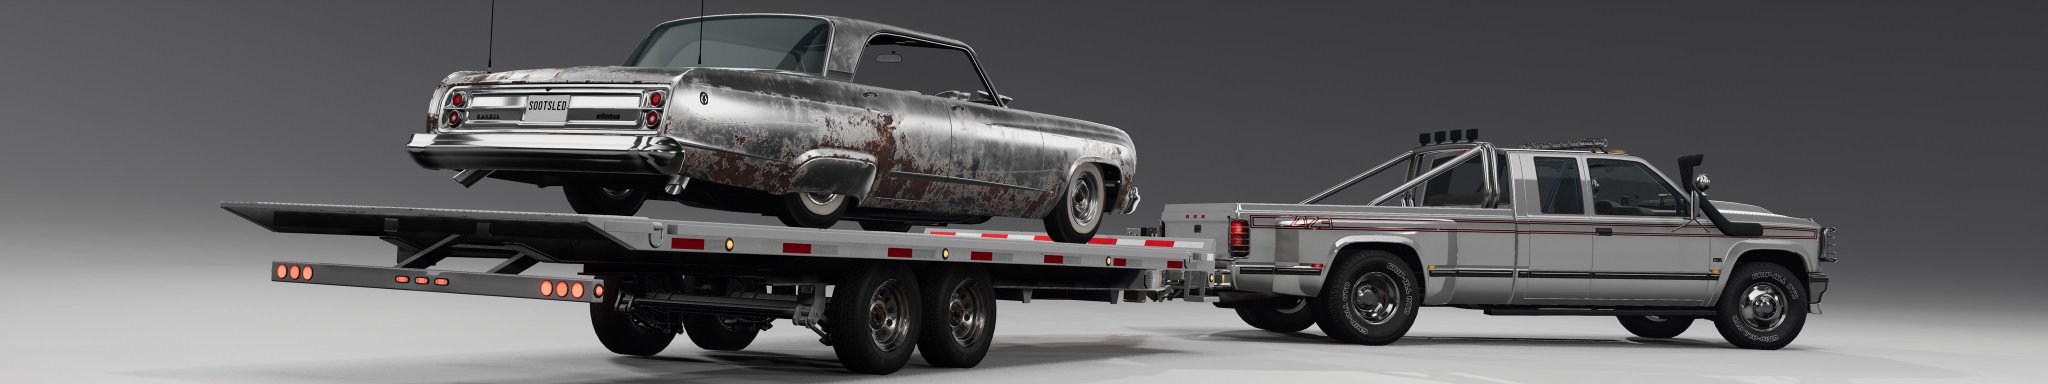 2 BeamNG SHOWROOM DUALLY with TRAILER and Bluebuck SOOT SLED copy.jpg